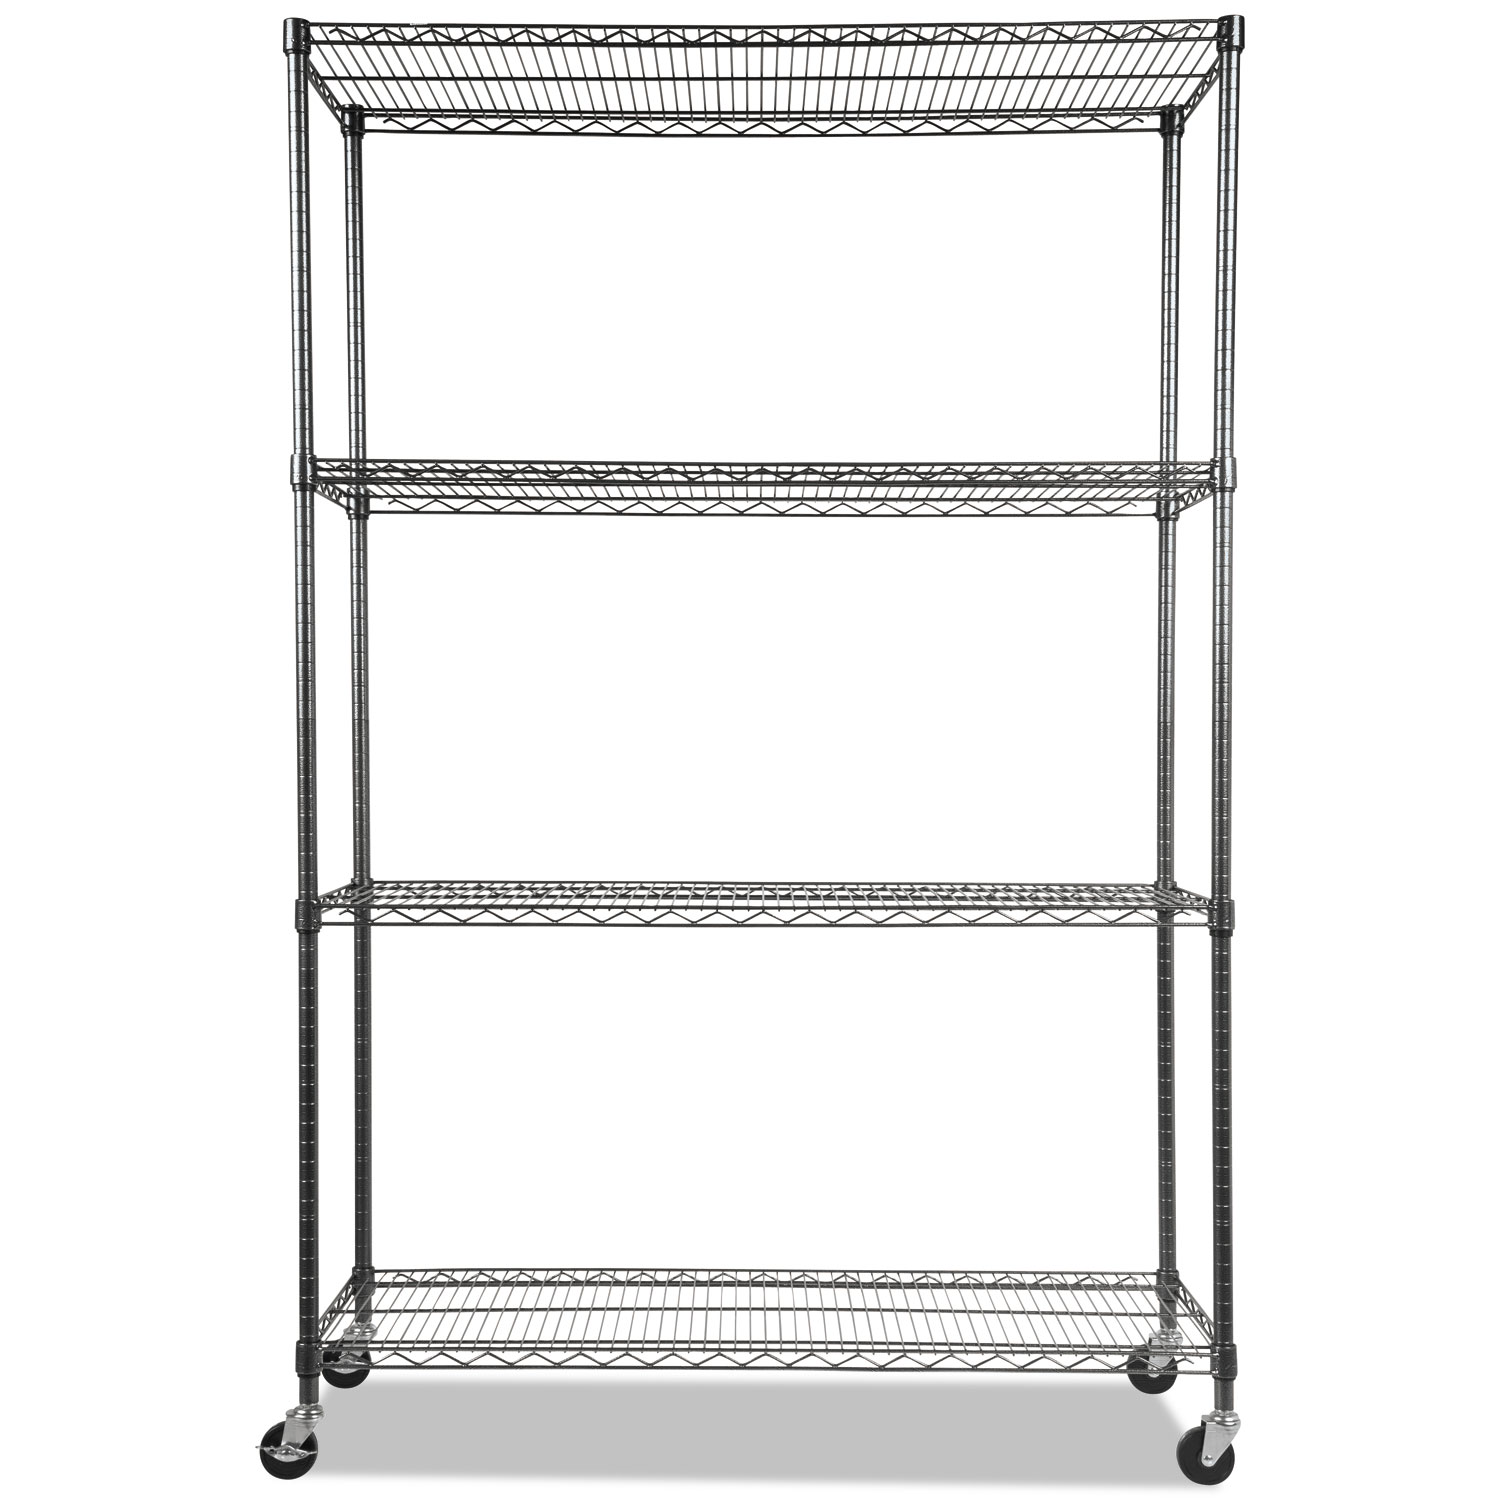 NSF Certified 4-Shelf Wire Kit w/Casters & Liner, 48 x 18 x 72, Black Anthracite